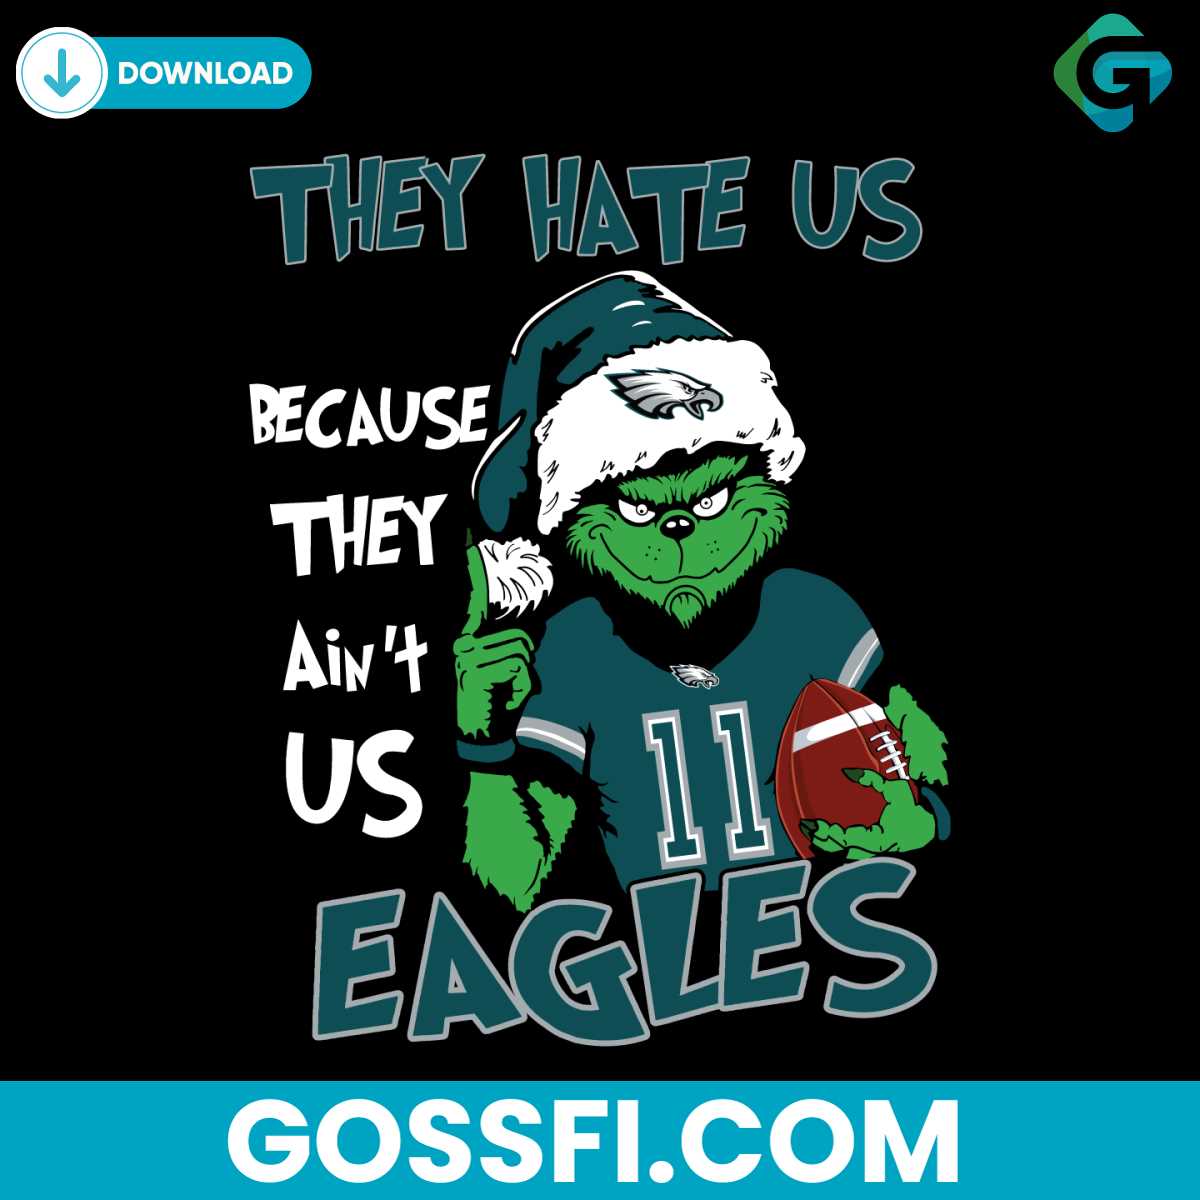 grinch-they-hate-us-because-they-aint-us-eagles-svg